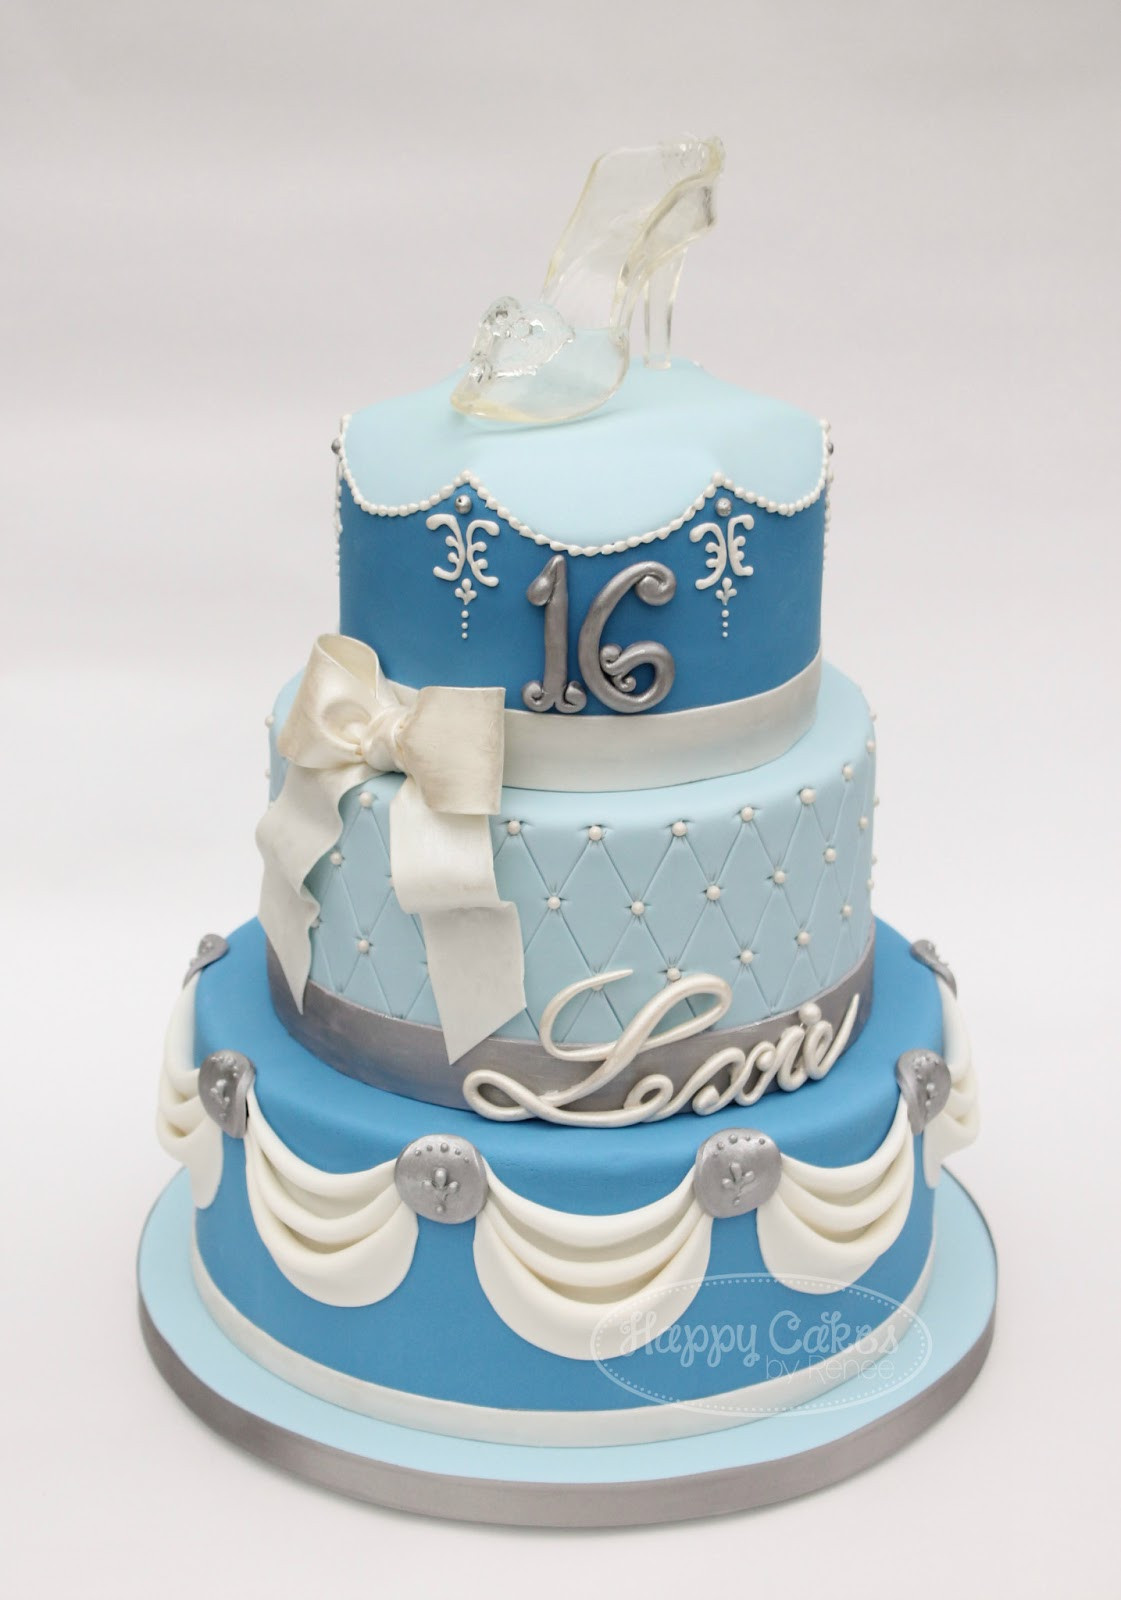 Best ideas about Sweet 16 Birthday Cake
. Save or Pin Happy Cakes Bakes Cinderella Sweet 16 Birthday Cake Now.